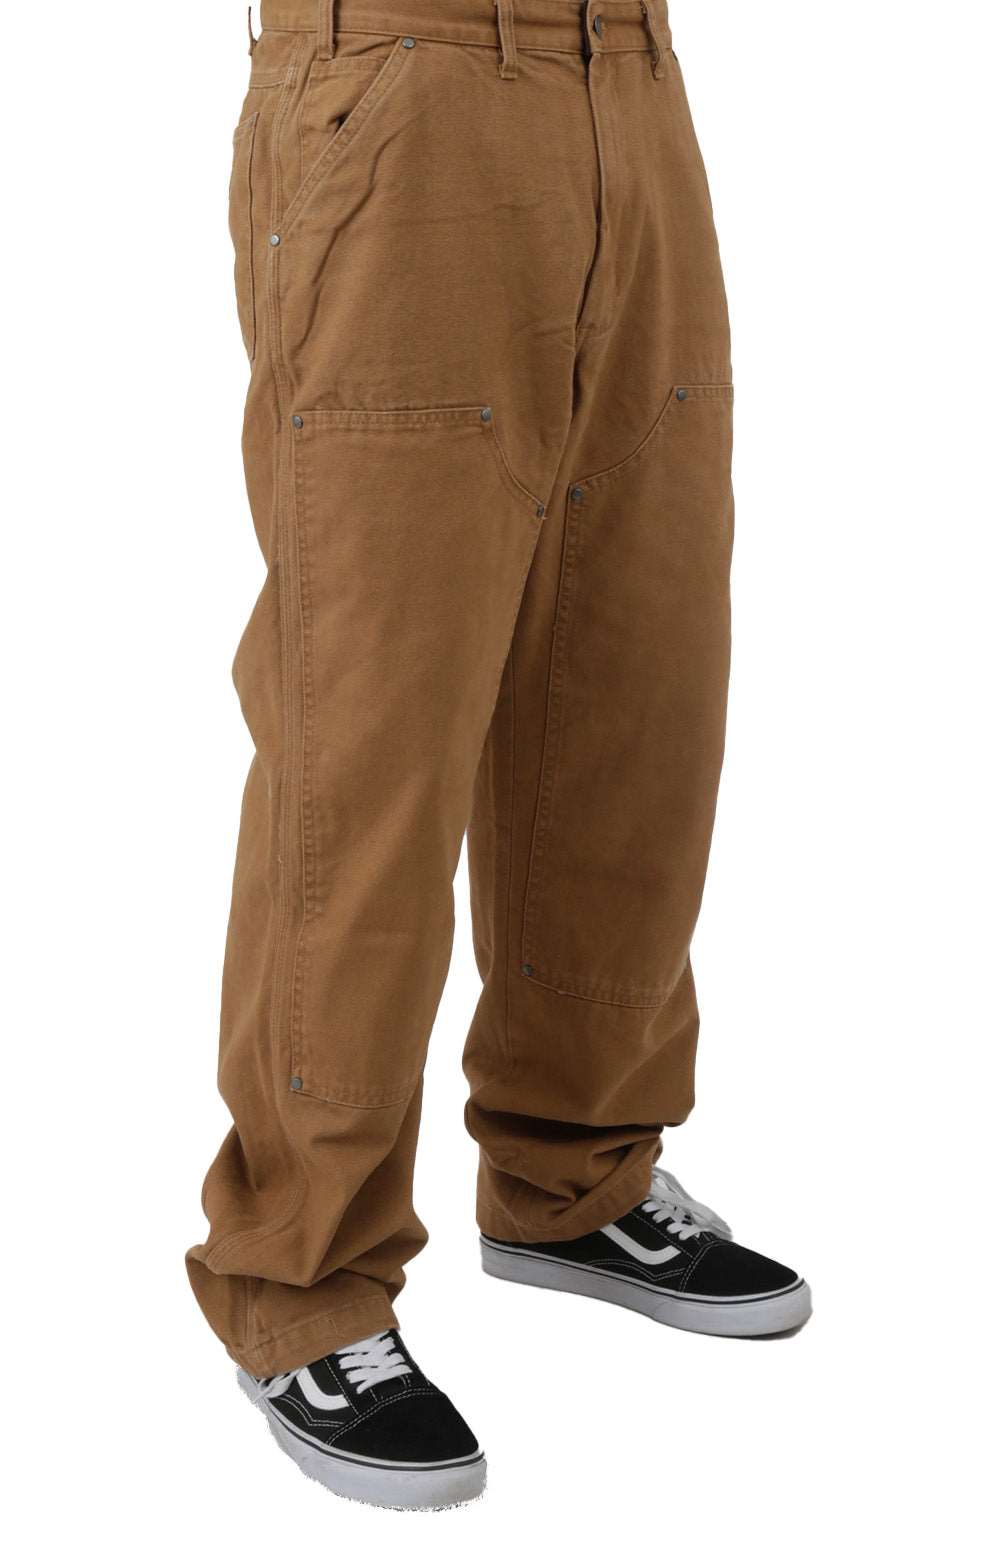 (DUR02SBD) Duck Double Front Pants - Stonewashed Brown Duck